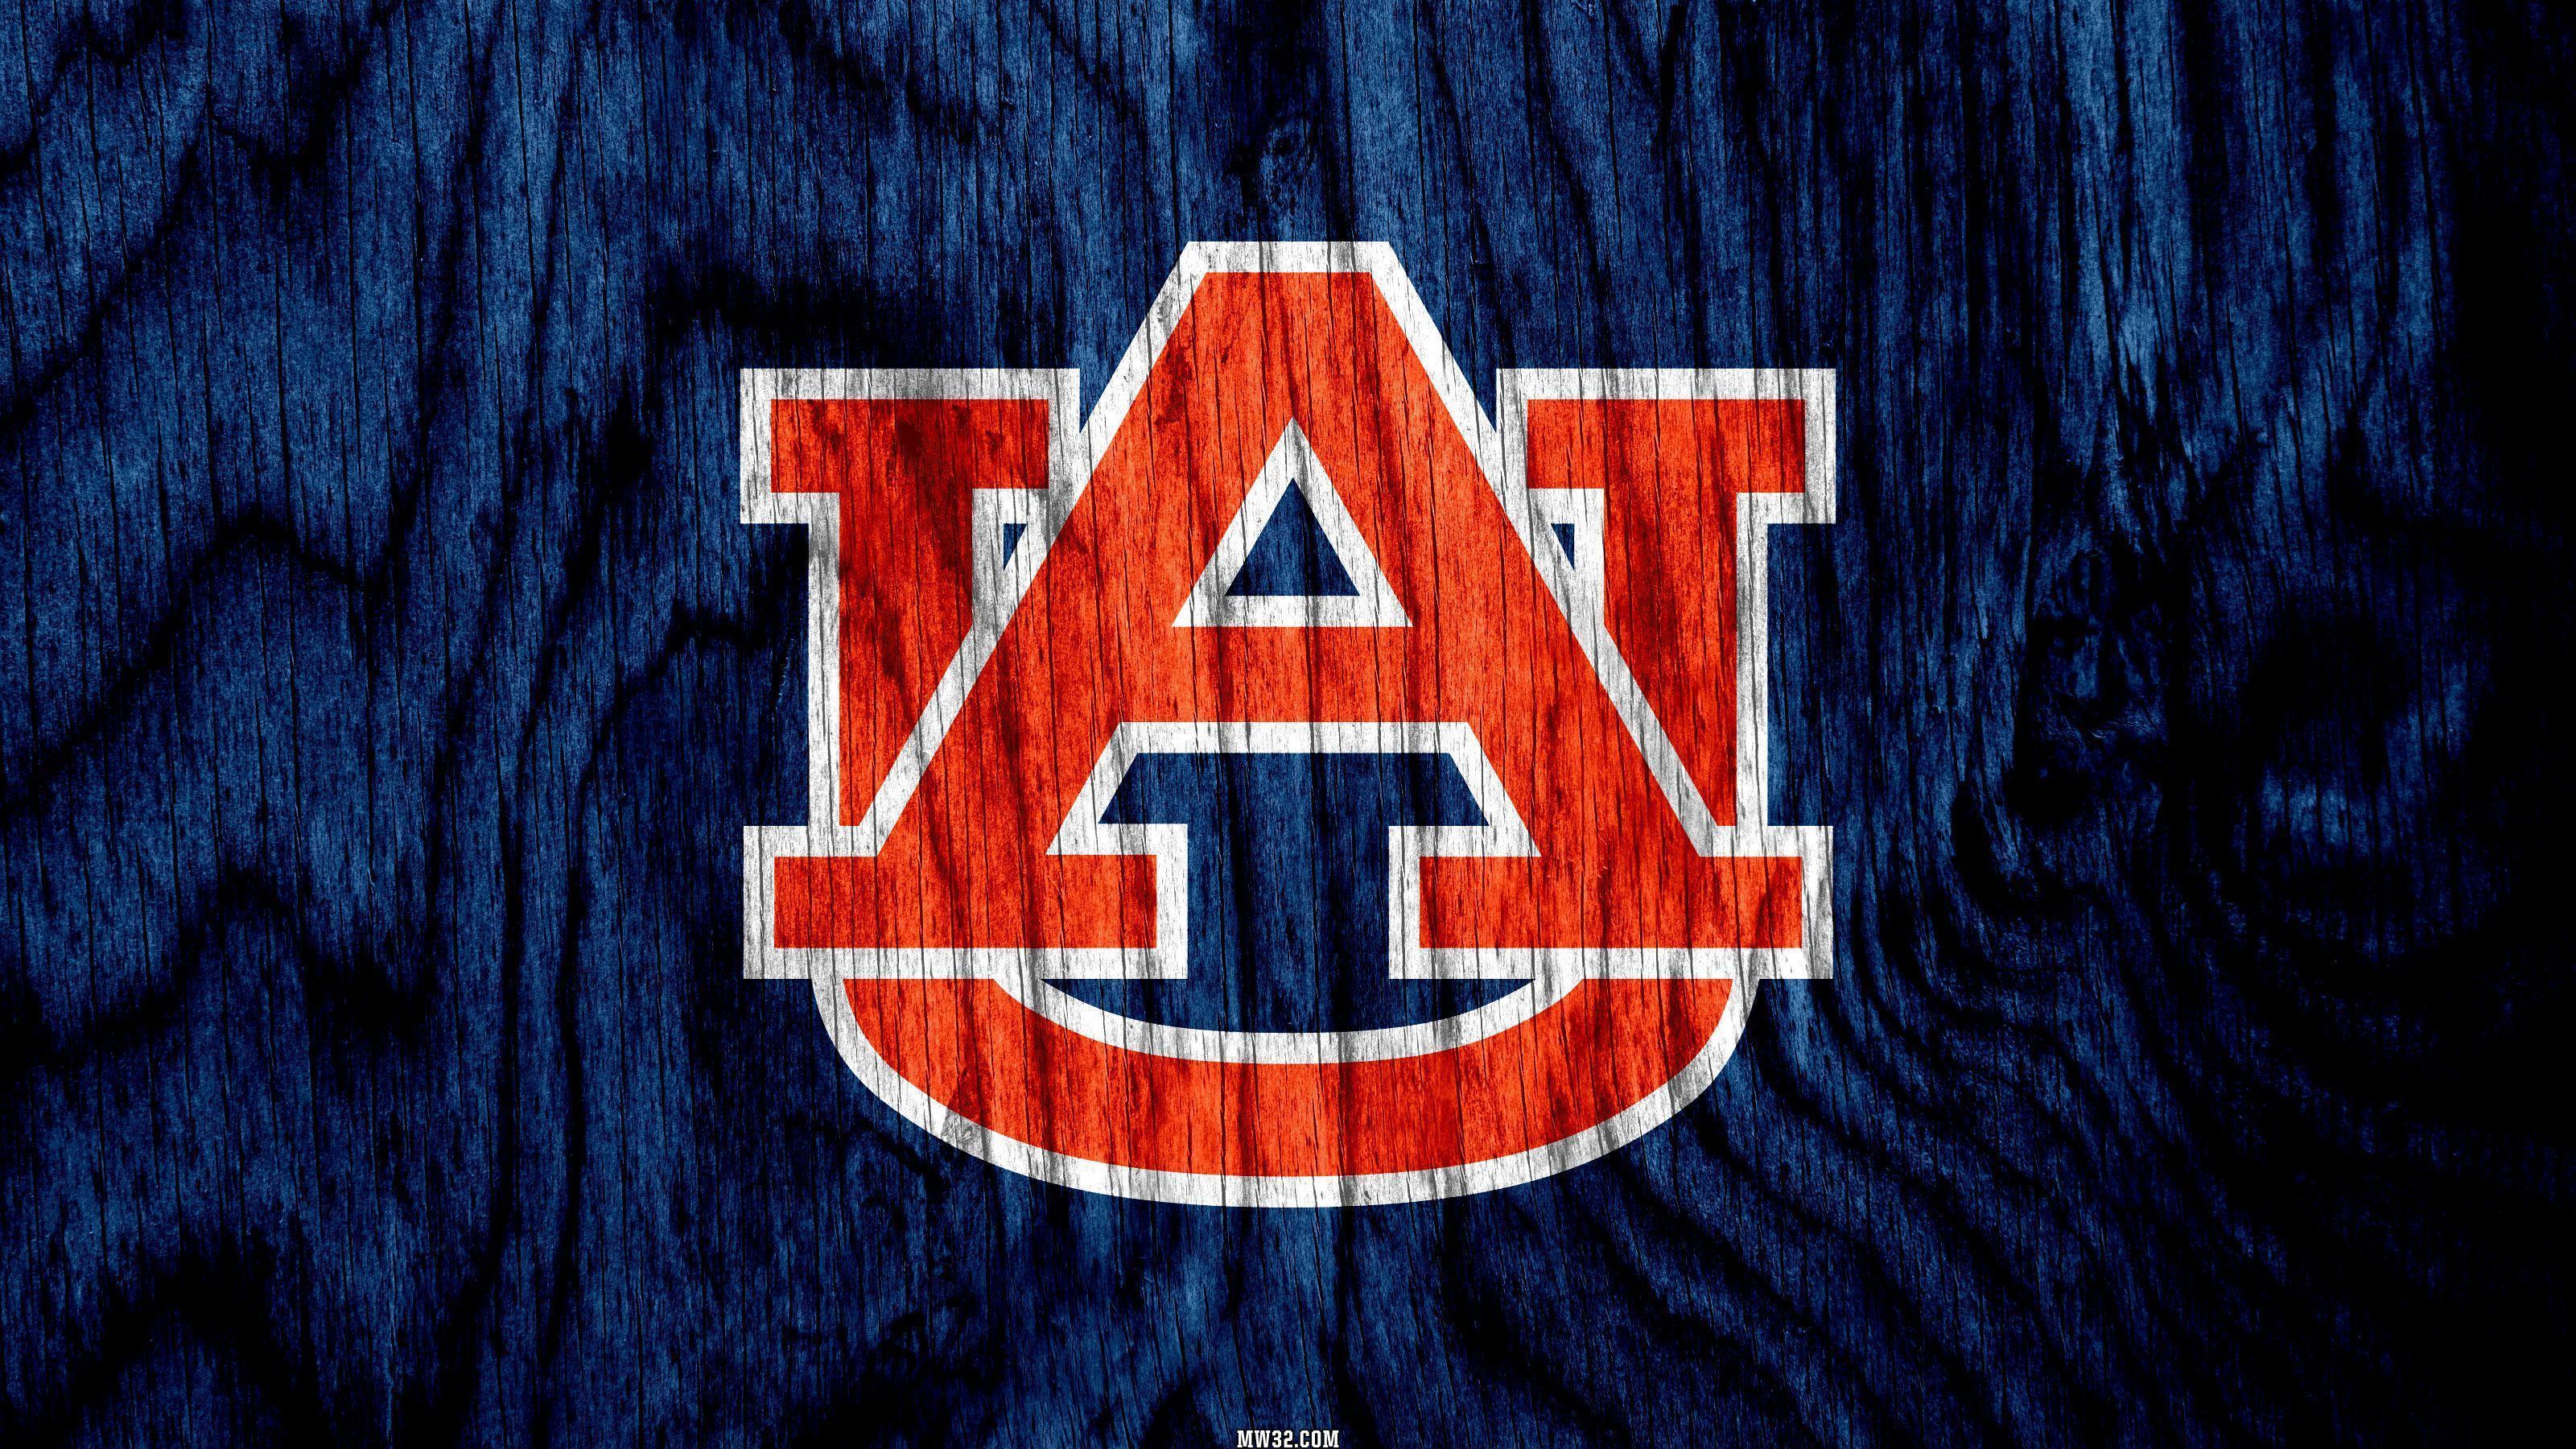 Free Auburn Tigers iPhone Wallpapers Install in seconds 12 to choose from  for every model of iPhone and iPod Touch ev  Auburn university Auburn Auburn  tigers